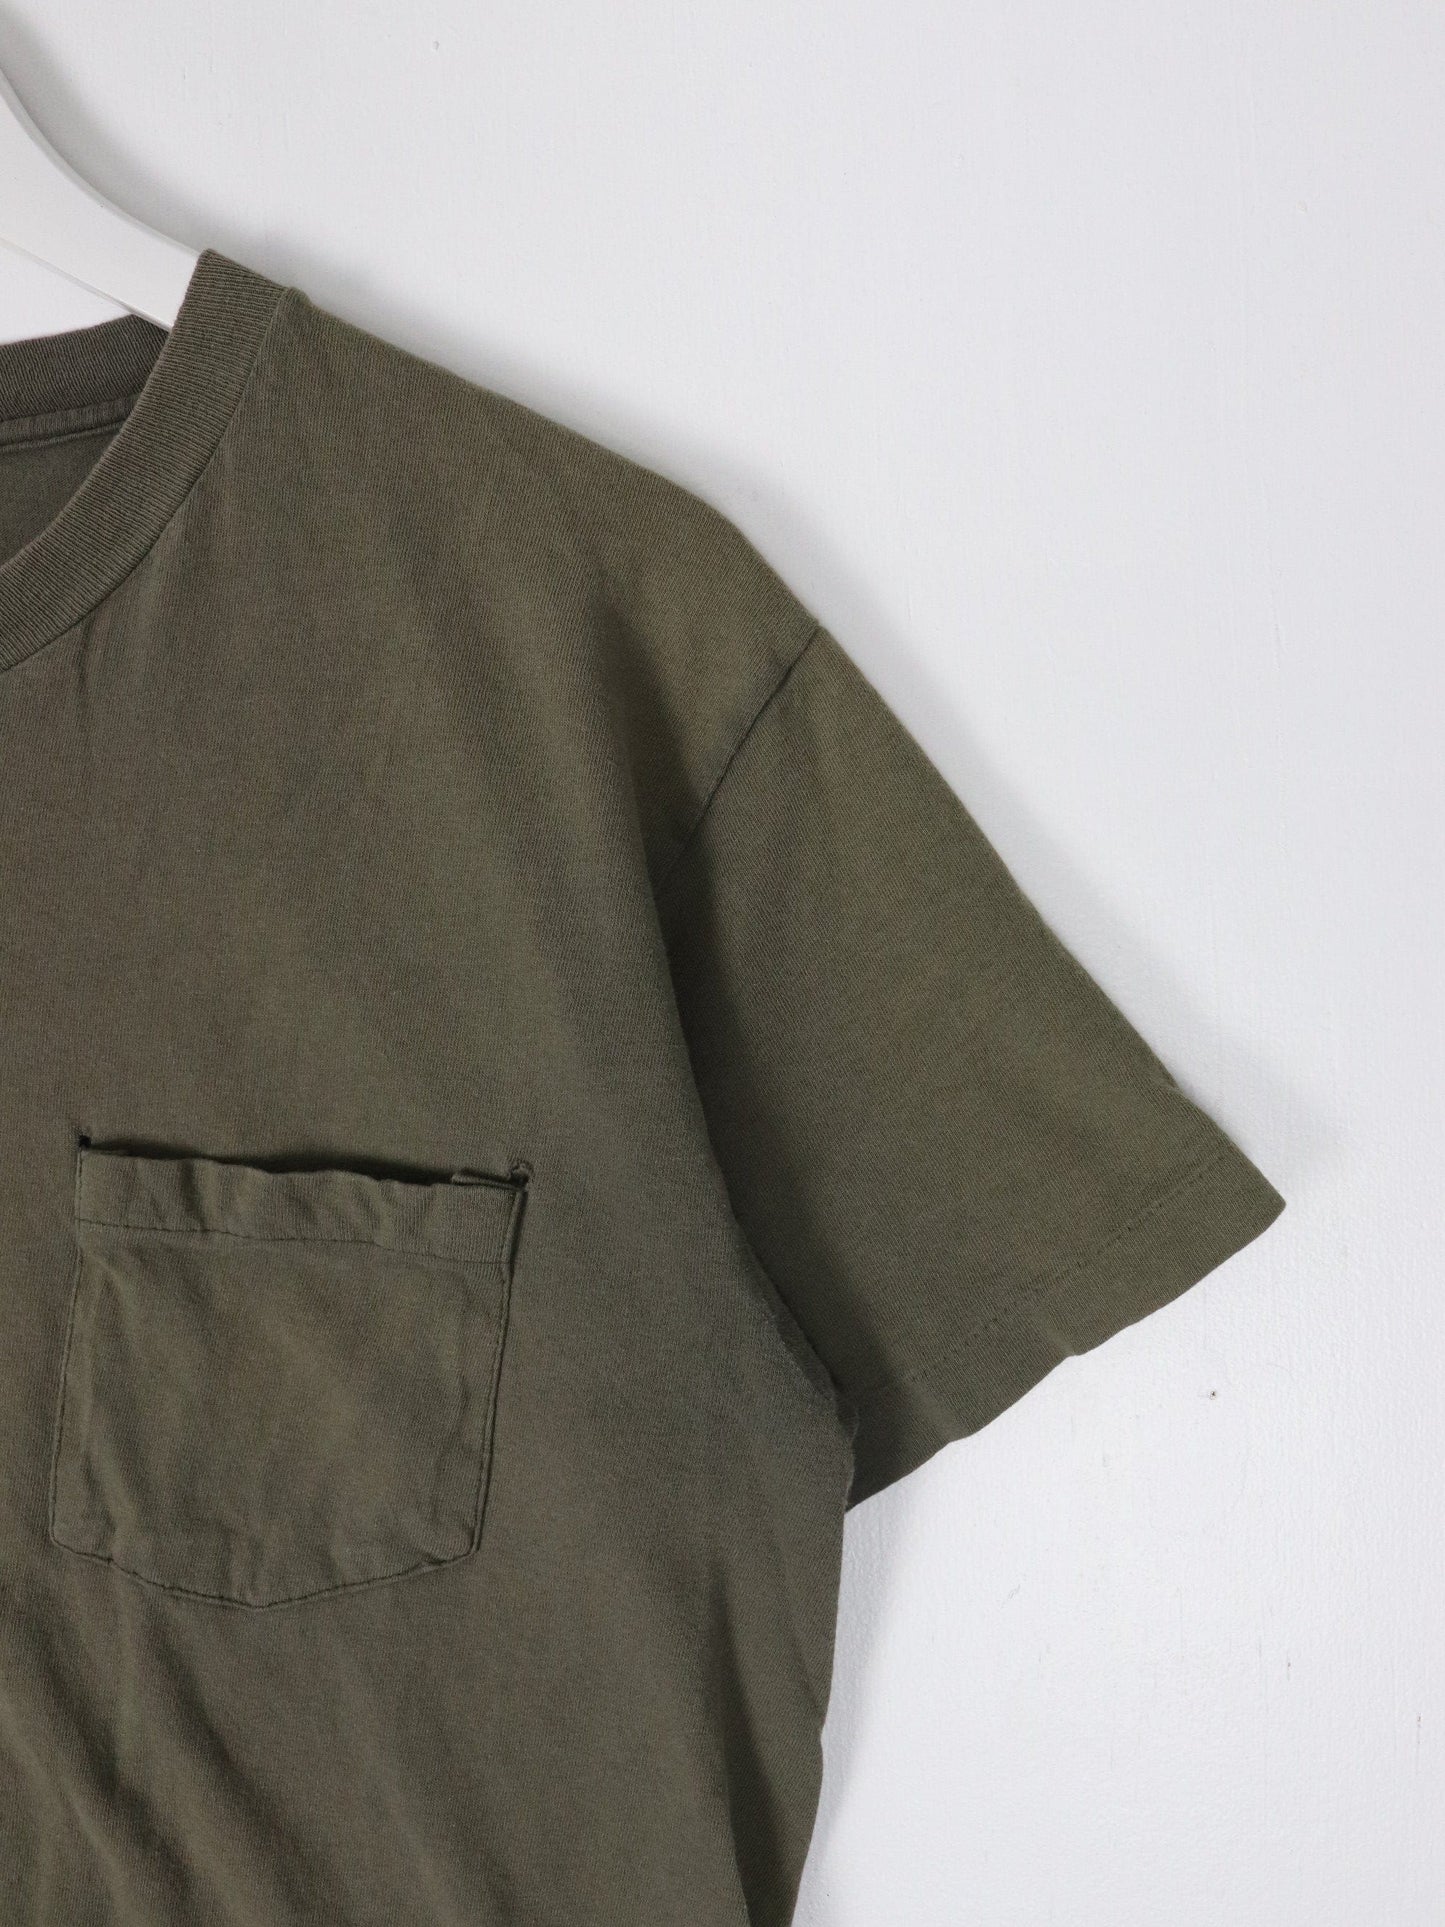 Other T-Shirts & Tank Tops Vintage T Shirt Mens Small Green Pocket Blank 90s